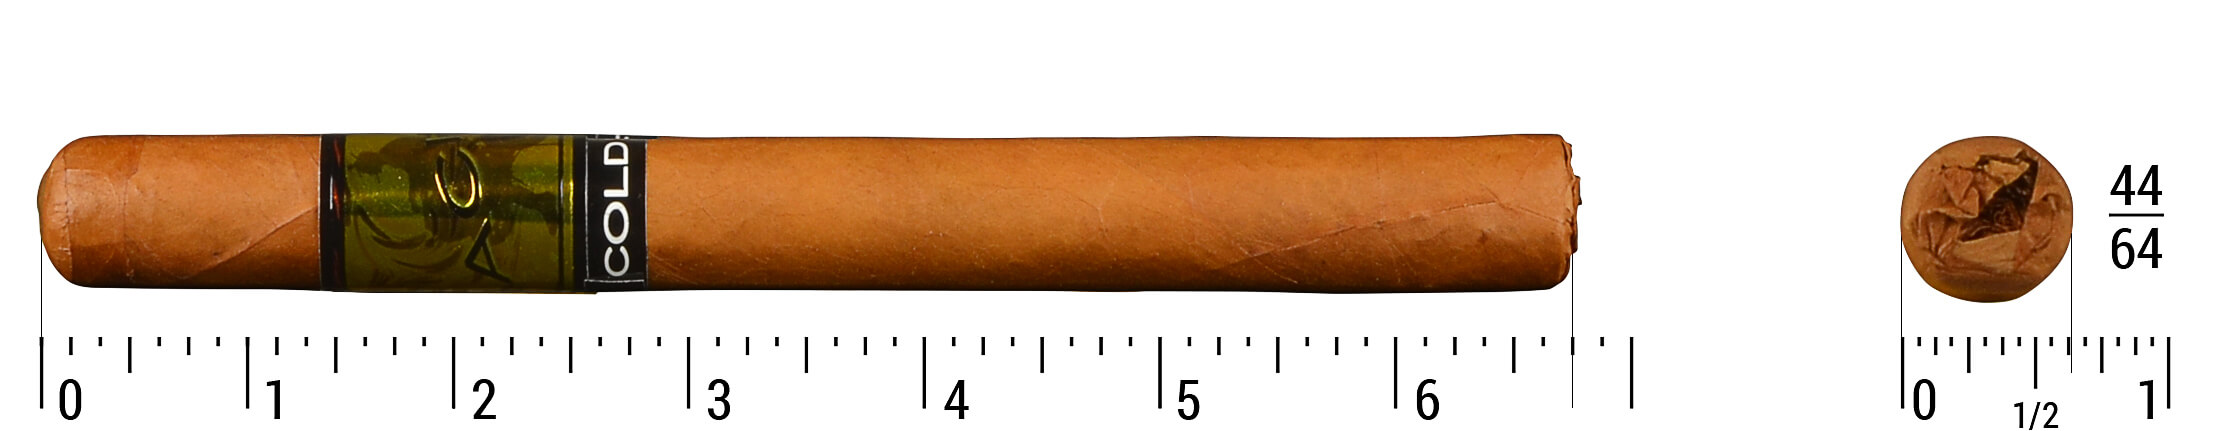 Acid Cold Infusion Single Cigar Size